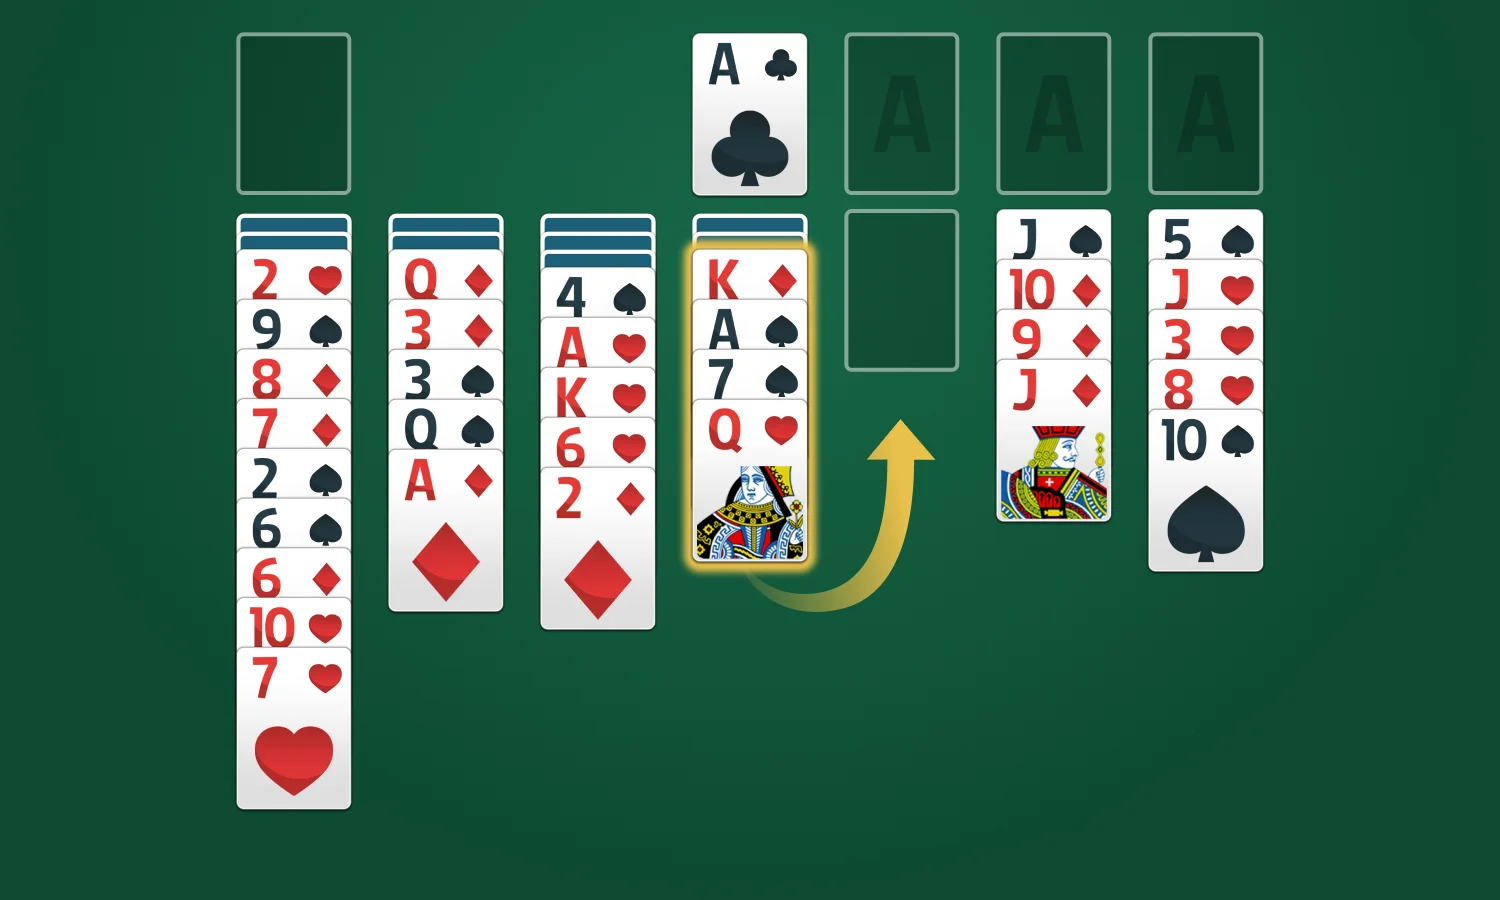 How to Play Scorpion Solitaire: Step 4